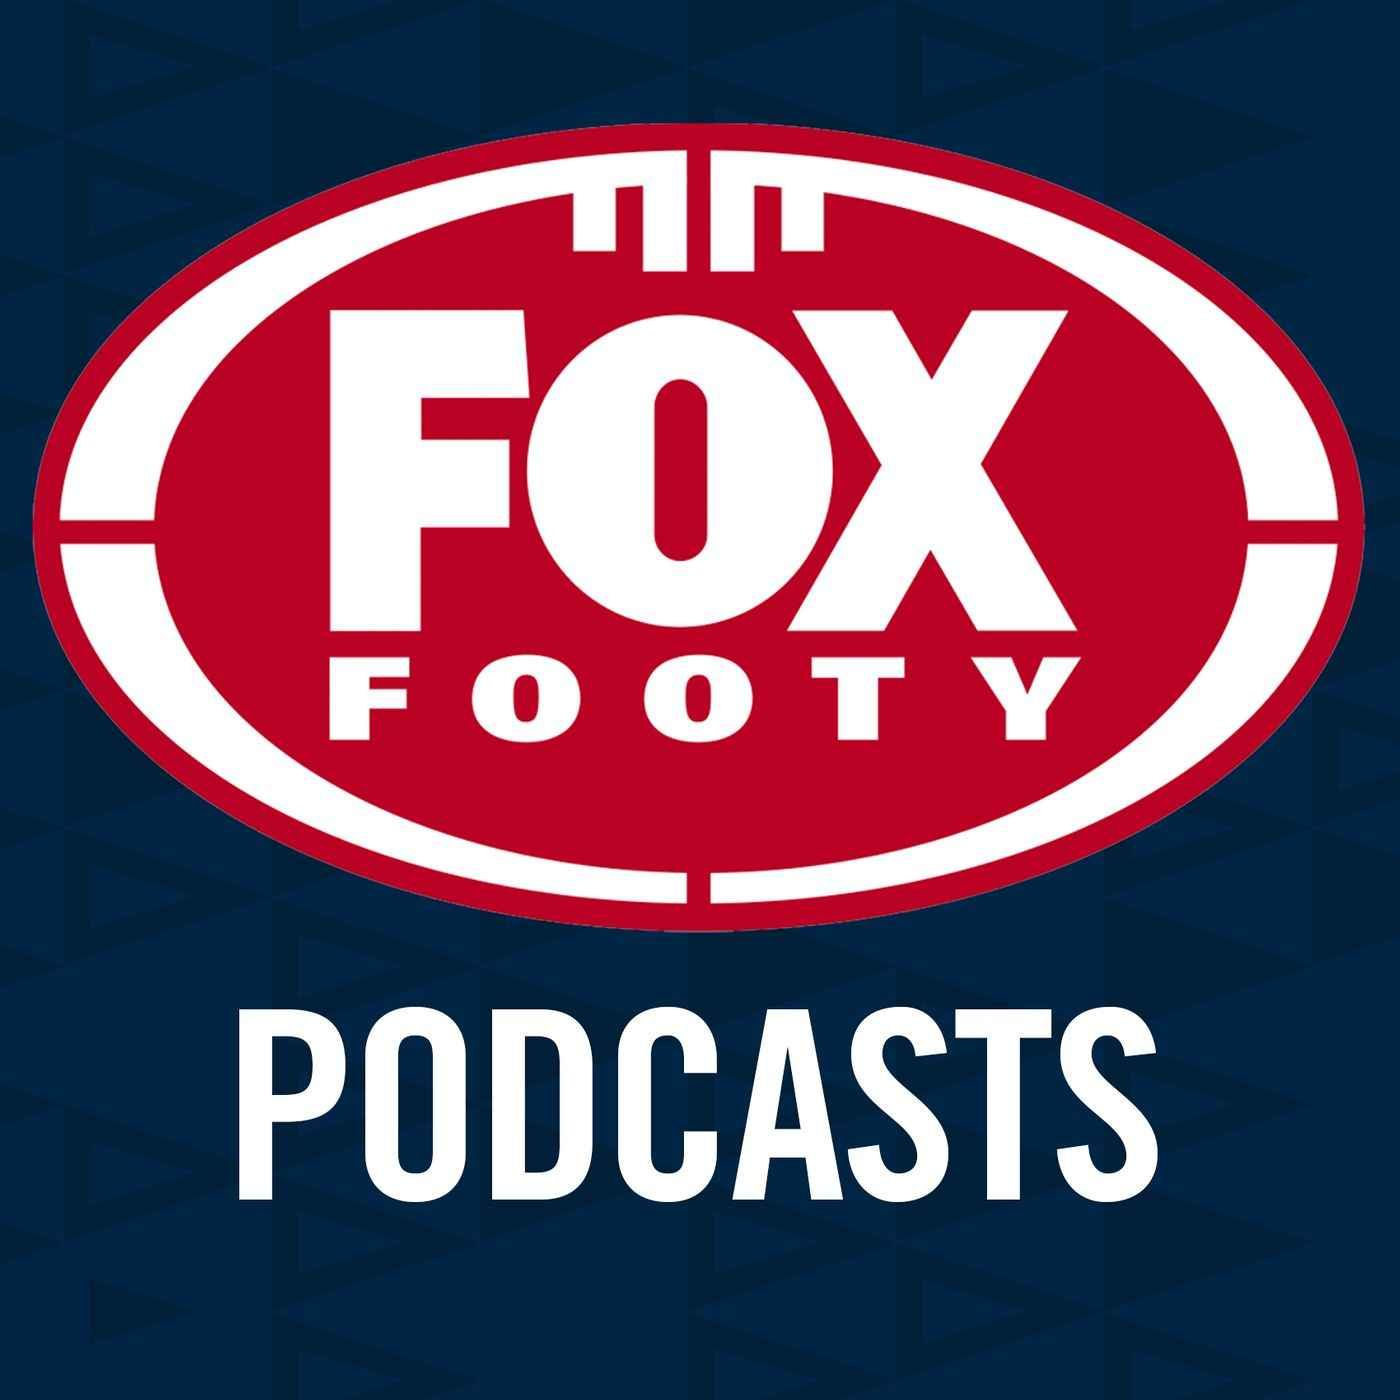 Dogs create history, Brownlow Medal preview